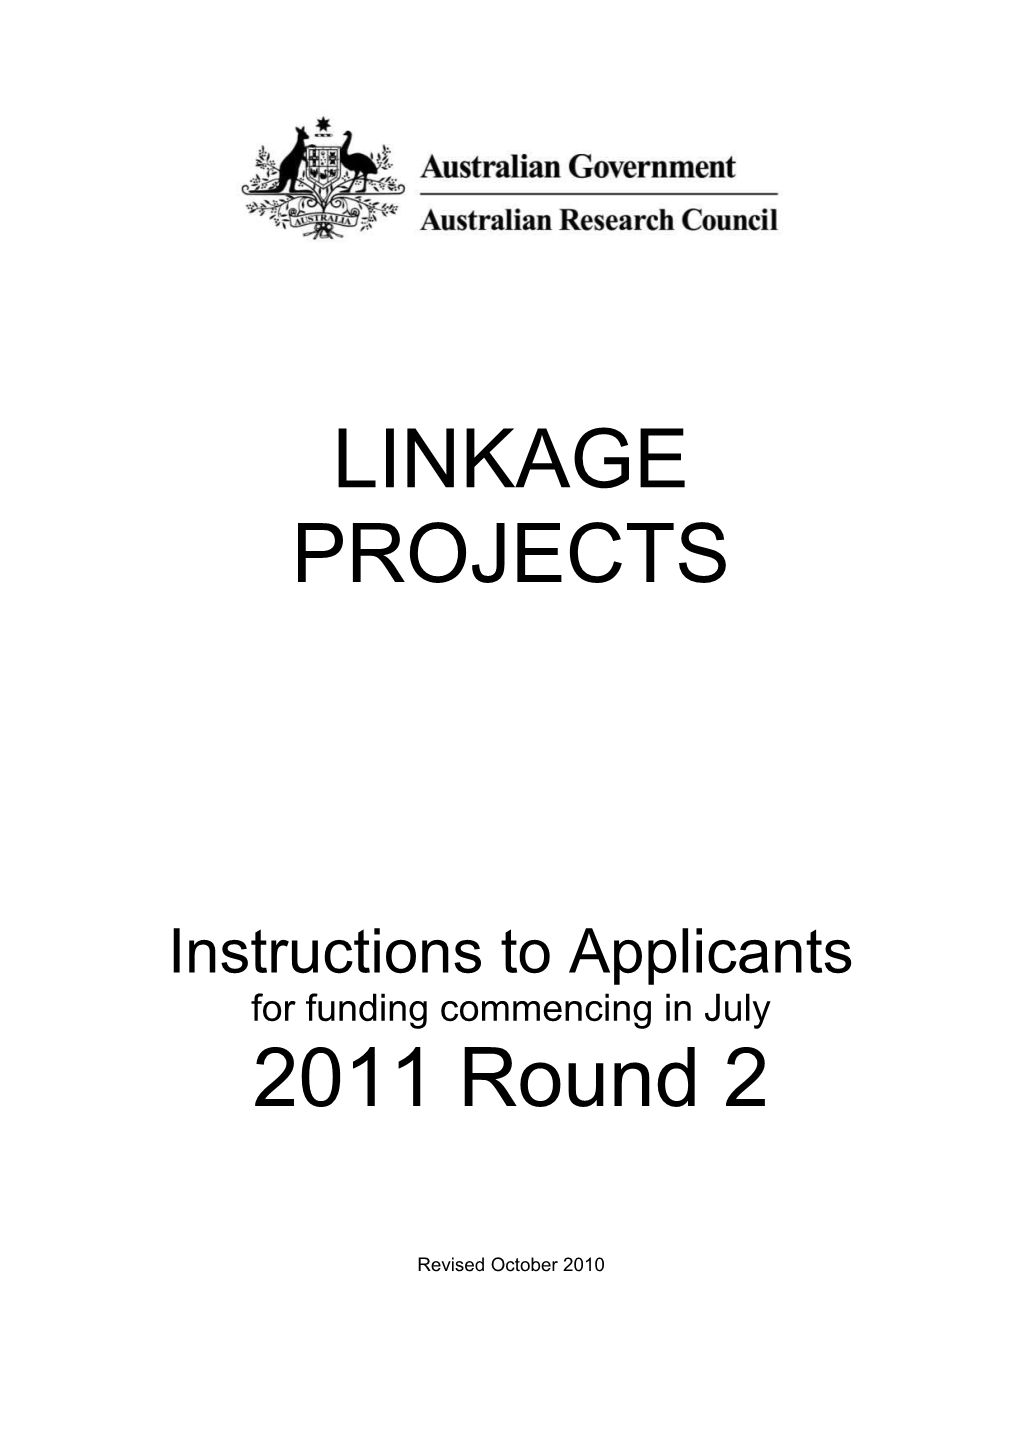 Linkage Projects Instructions to Applicants - Round 2 for Funding Commencing in 2011